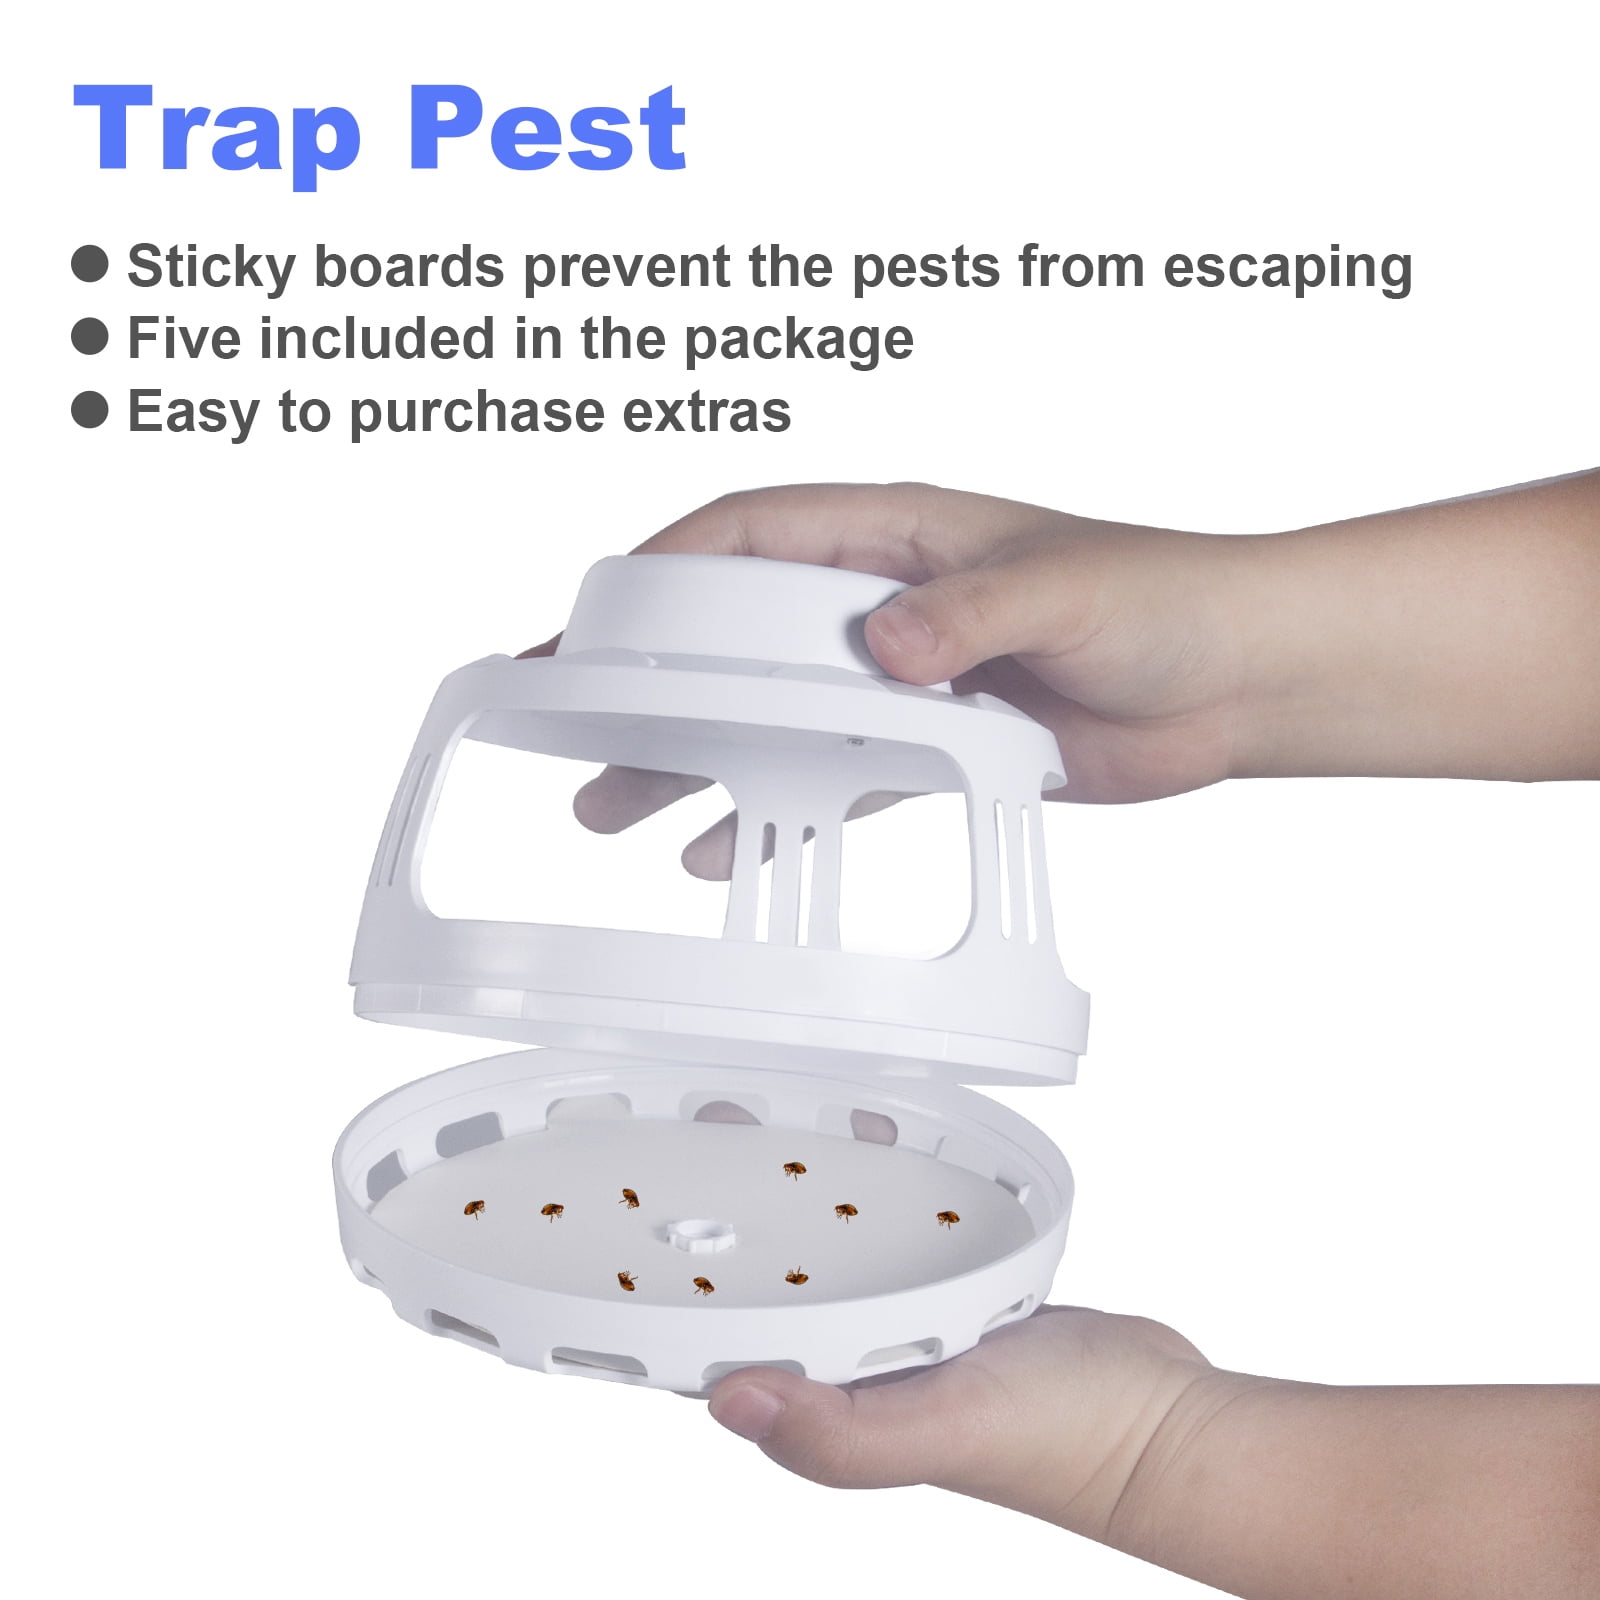  Protecker Flea Traps for Inside Your Home,2023 New Flea Light  Trap Indoor,Flea with Refills and Sticky Pads,Flea Killer House,Sticky Flea  Trap,Safe Kids,Friendly to Pets(2 Pack) : Patio, Lawn & Garden